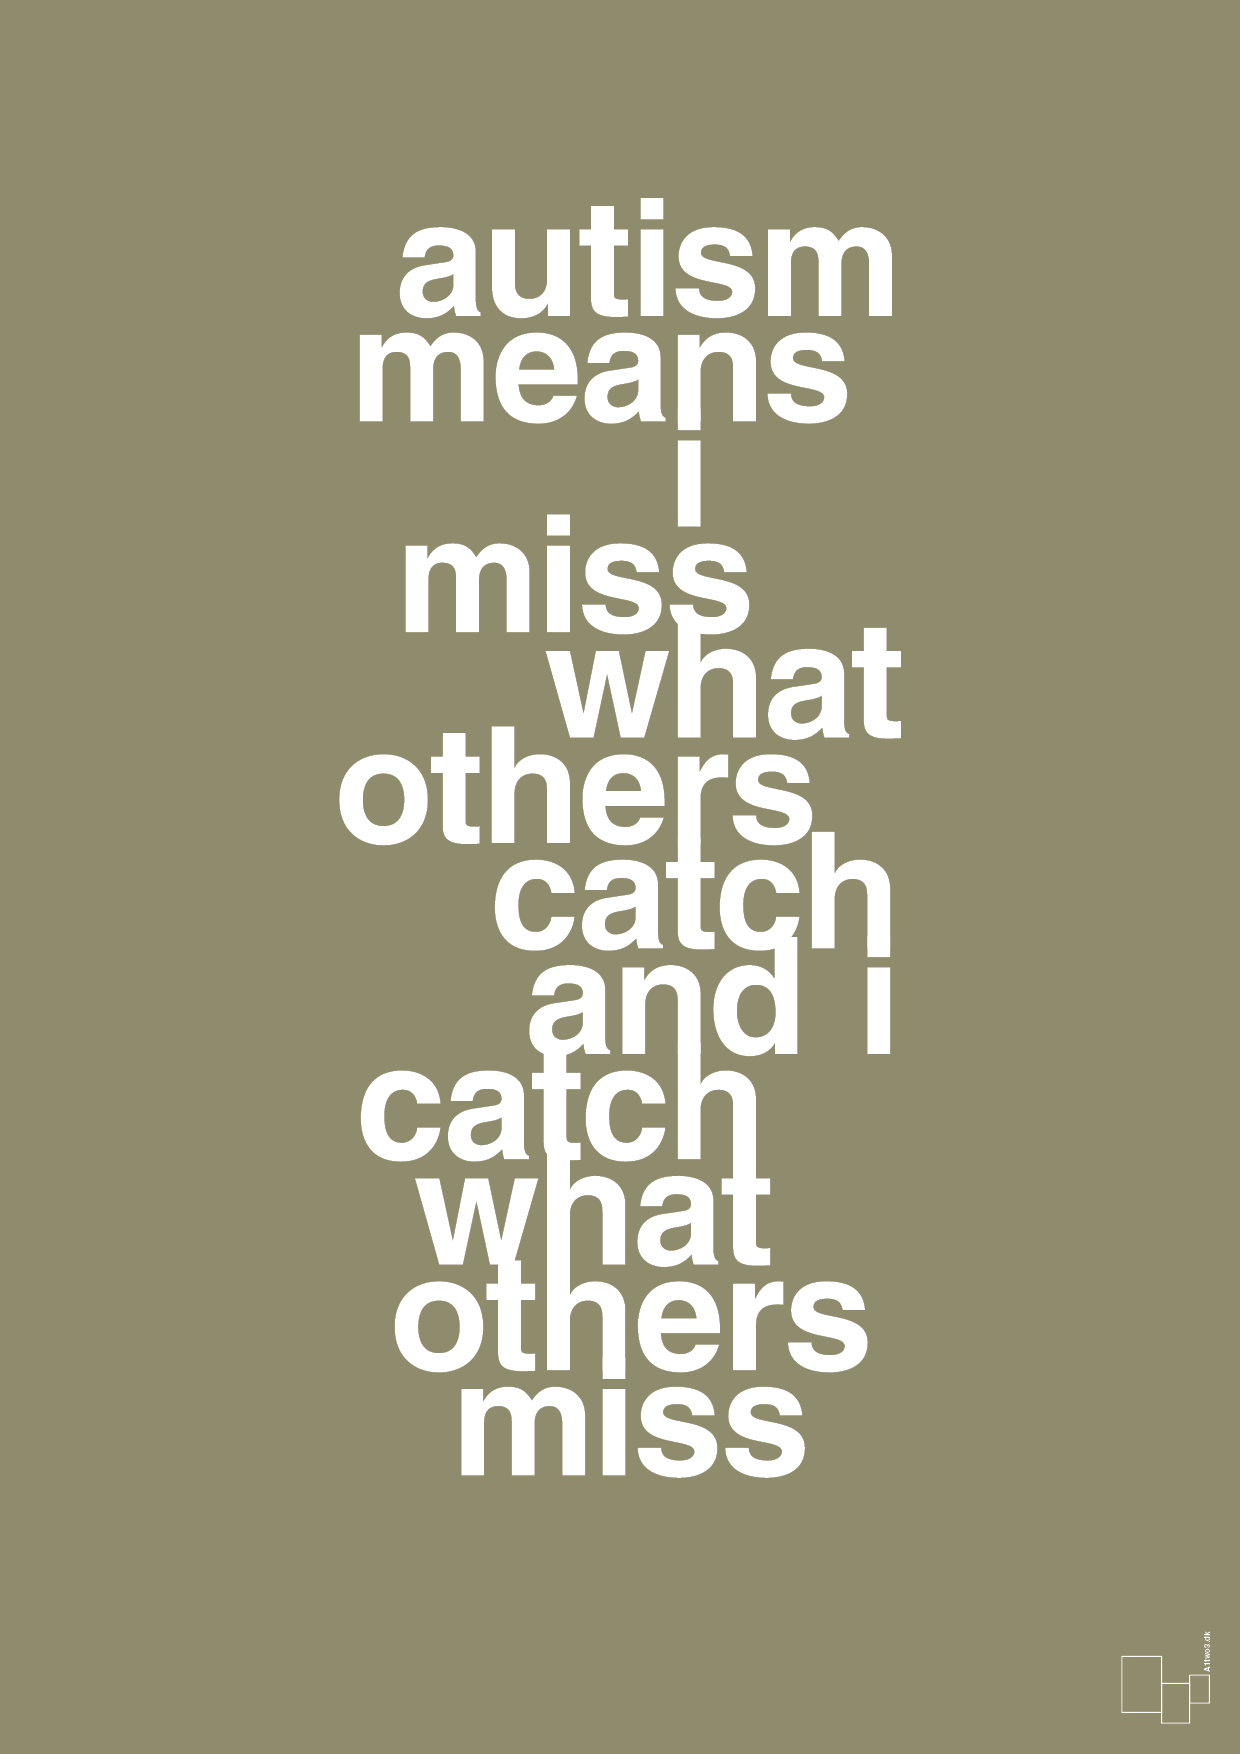 autism means i miss what others catch and i catch what others miss - Plakat med Samfund i Misty Forrest